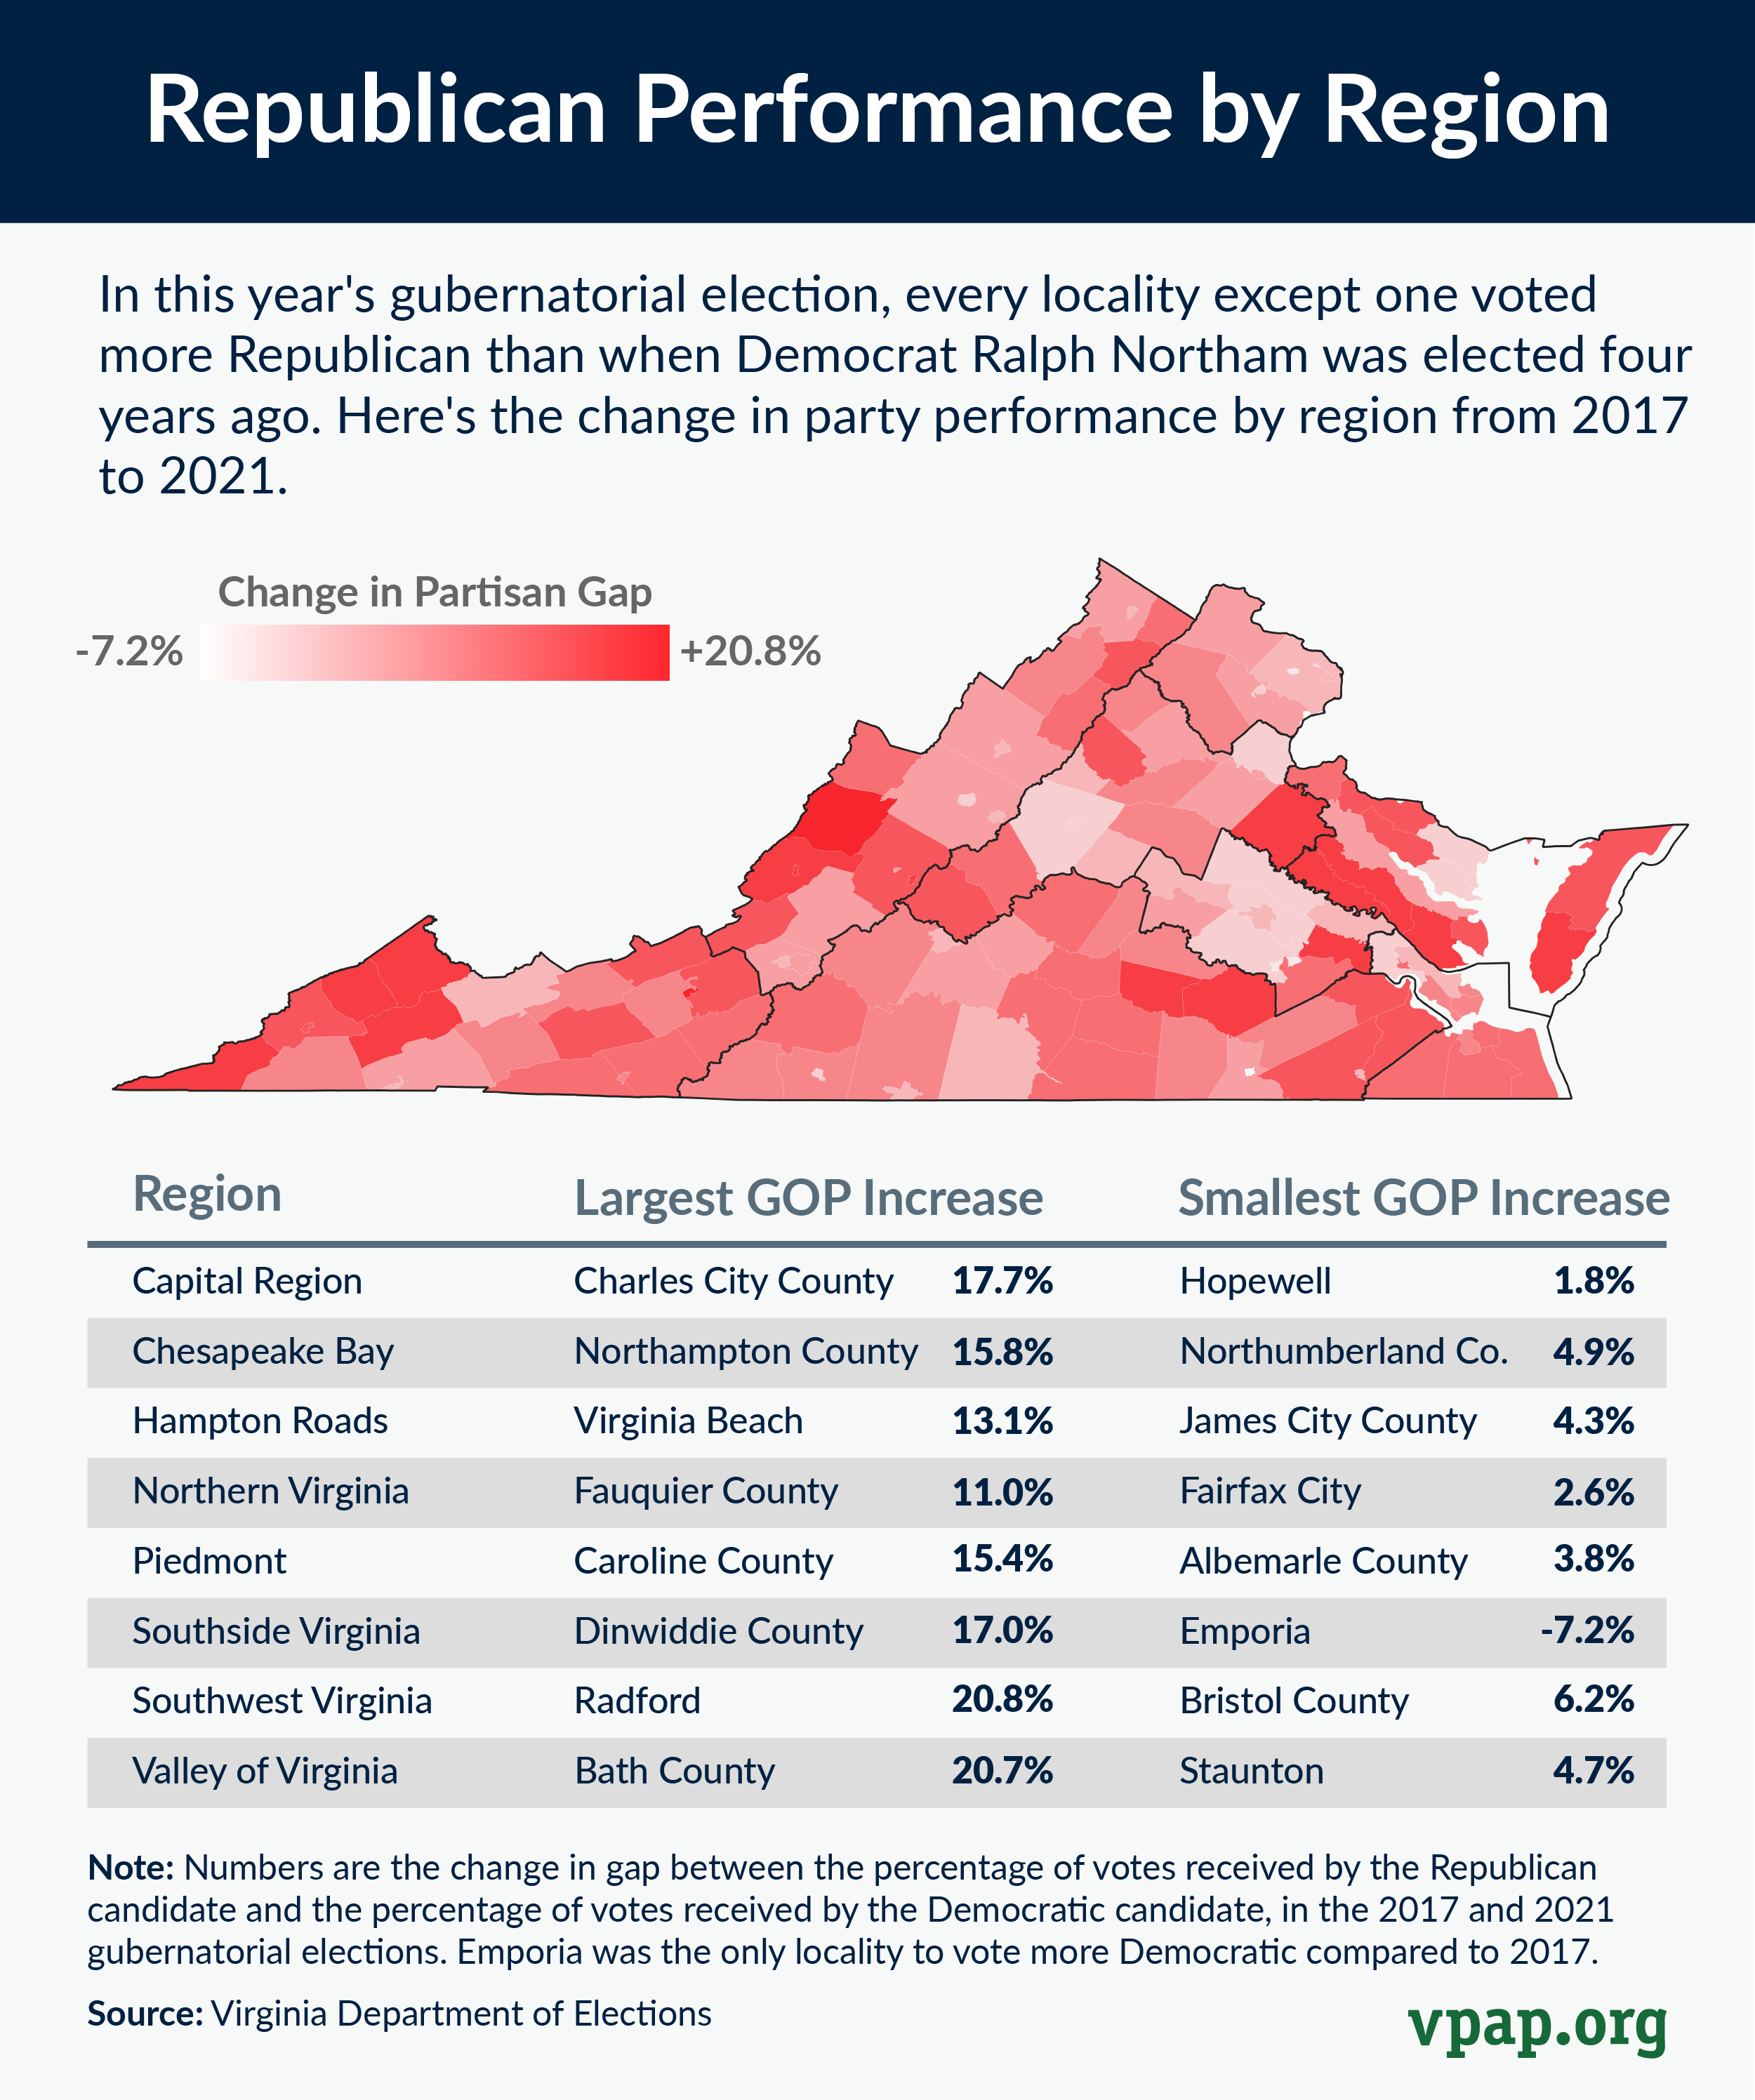 2021 Fauquier Republican Get Out The Vote Results Republican Governor Vote In Fauquier County: Increased from 13,394 in 2017 to 22,233 in 2021 Increase of 8,839 a 66% increase. Third highest Republican vote in Fauquier County behind 2020 and 2016 elections. 2020 Republican Vote 25,926 2016 Republican Vote 24,008 Recognized by Virginia Public Access Project […]